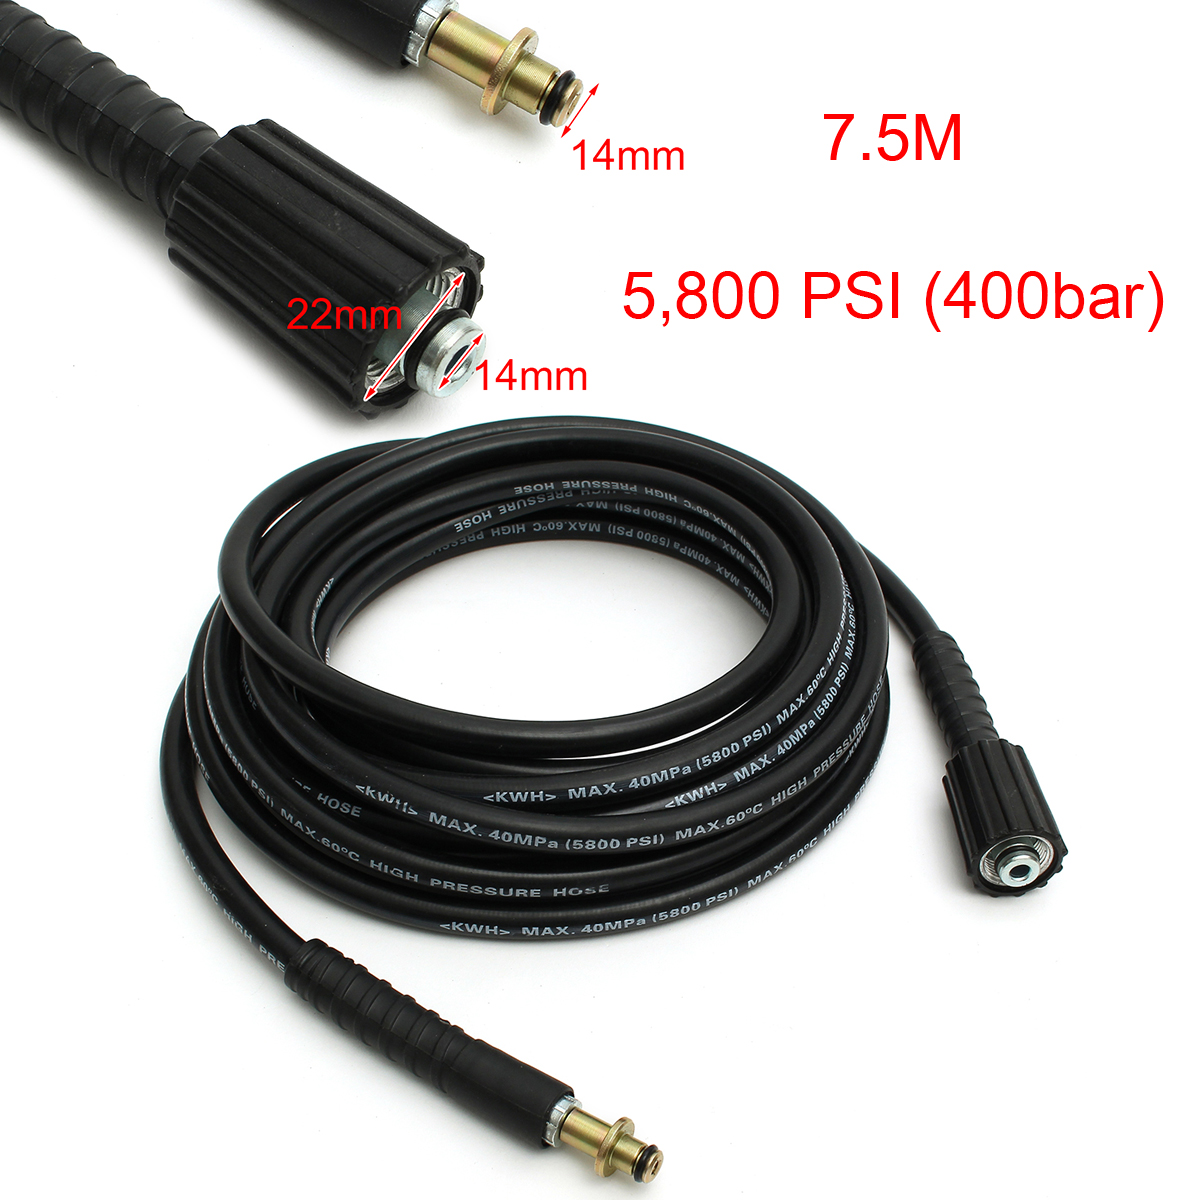 8M315-inch-2300PSI-Resin-Pipe-High-Pressure-Washer-Jet-Wash-Hose-M22-M14-14mm22mm-1434051-3